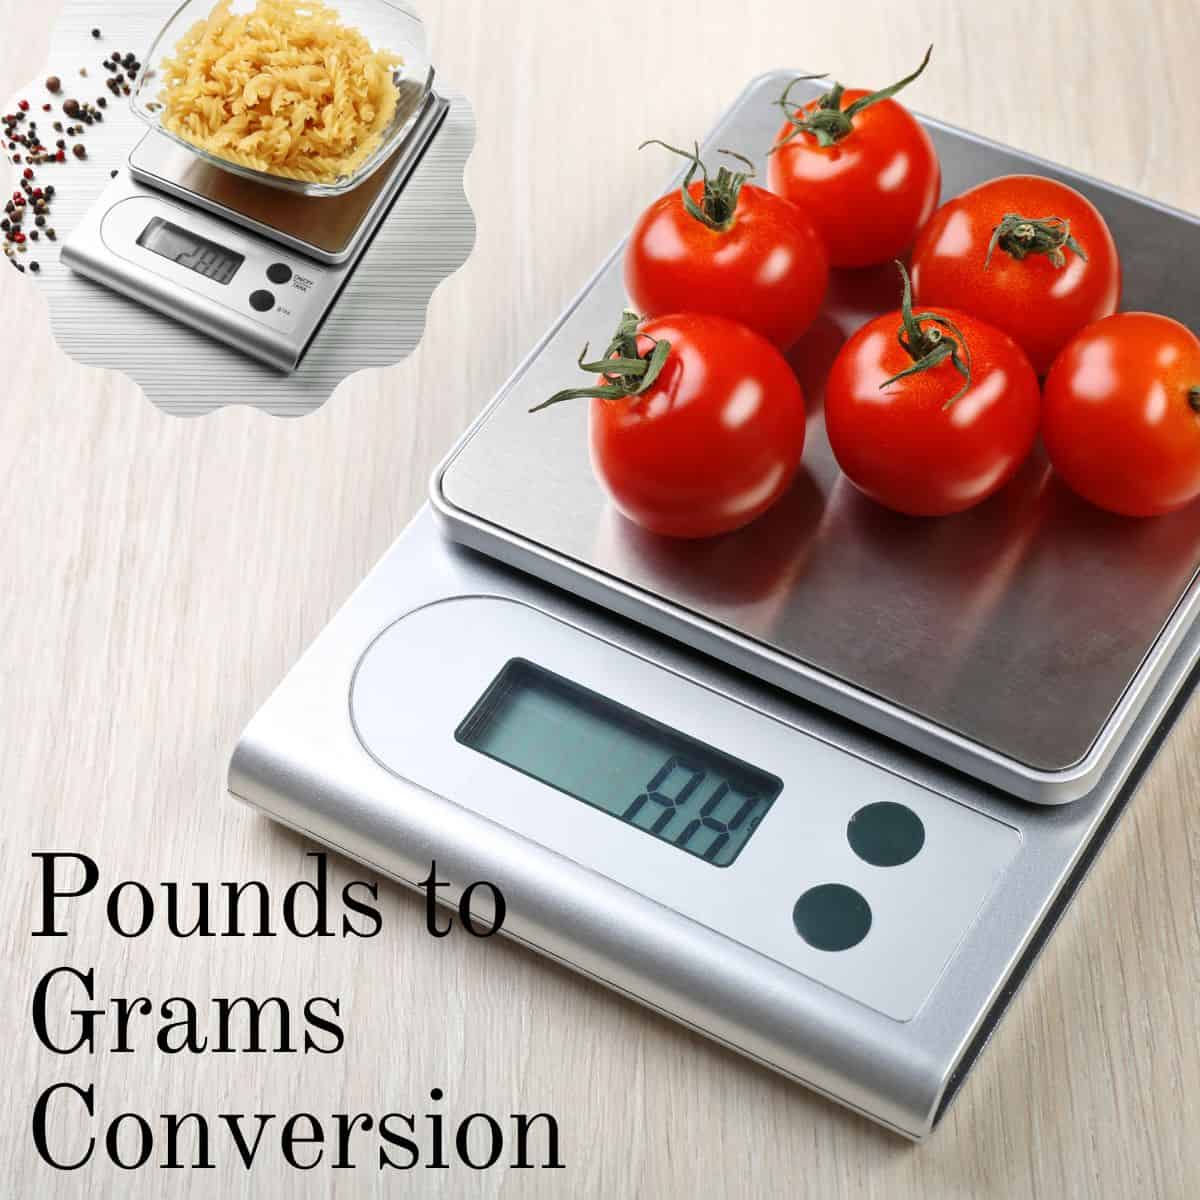 image showing digital scale weighing tomatoes and pasta to weight pounds to grams